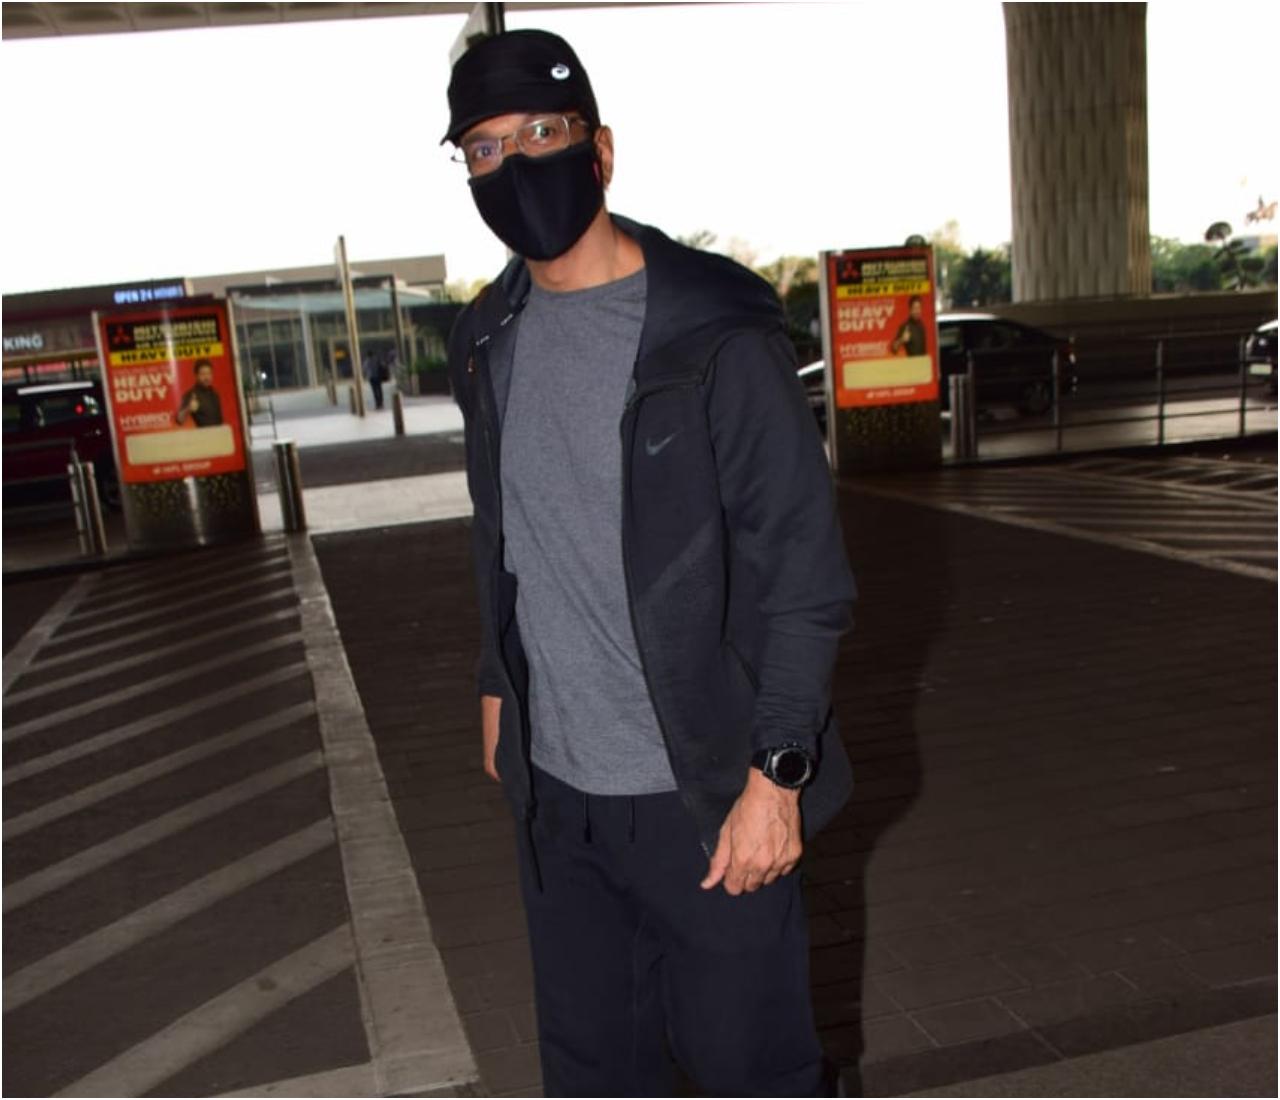 Javed Jaffrey, who was recently seen in Varun Dhawan and Sara Ali Khan-starrer Coolie No.1, was also snapped at the airport.